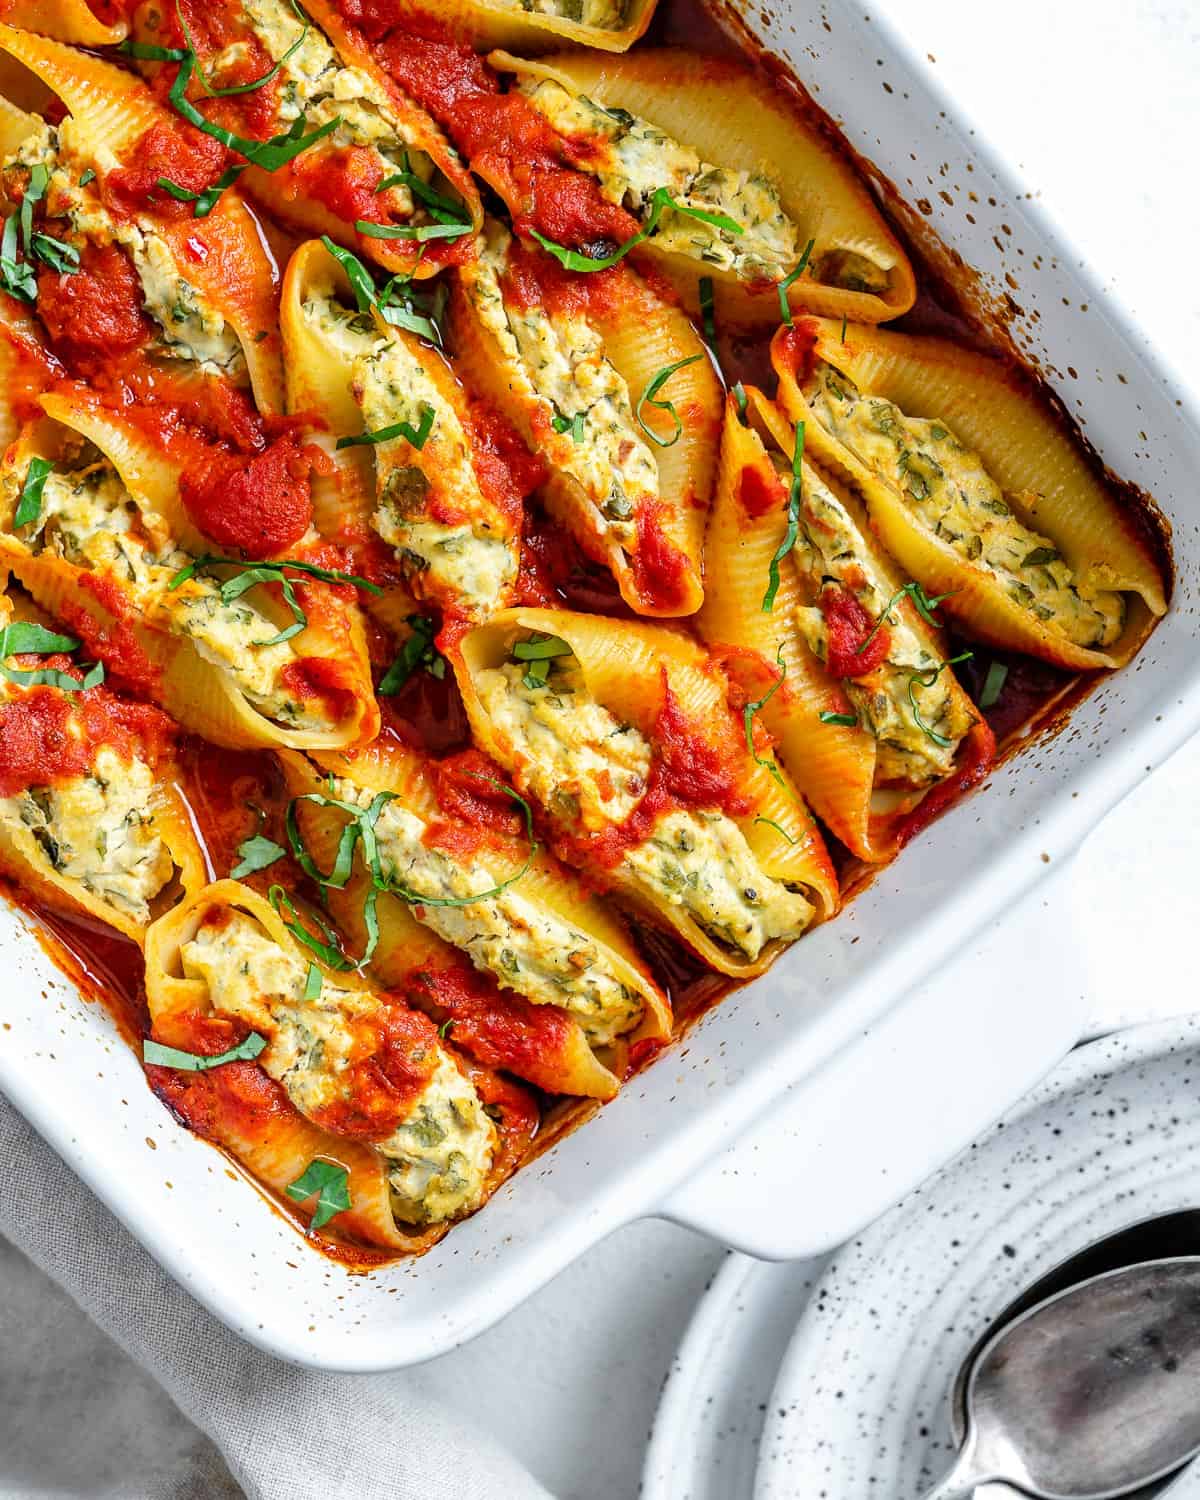 completed Stuffed Shells in a white baking dish against a white background